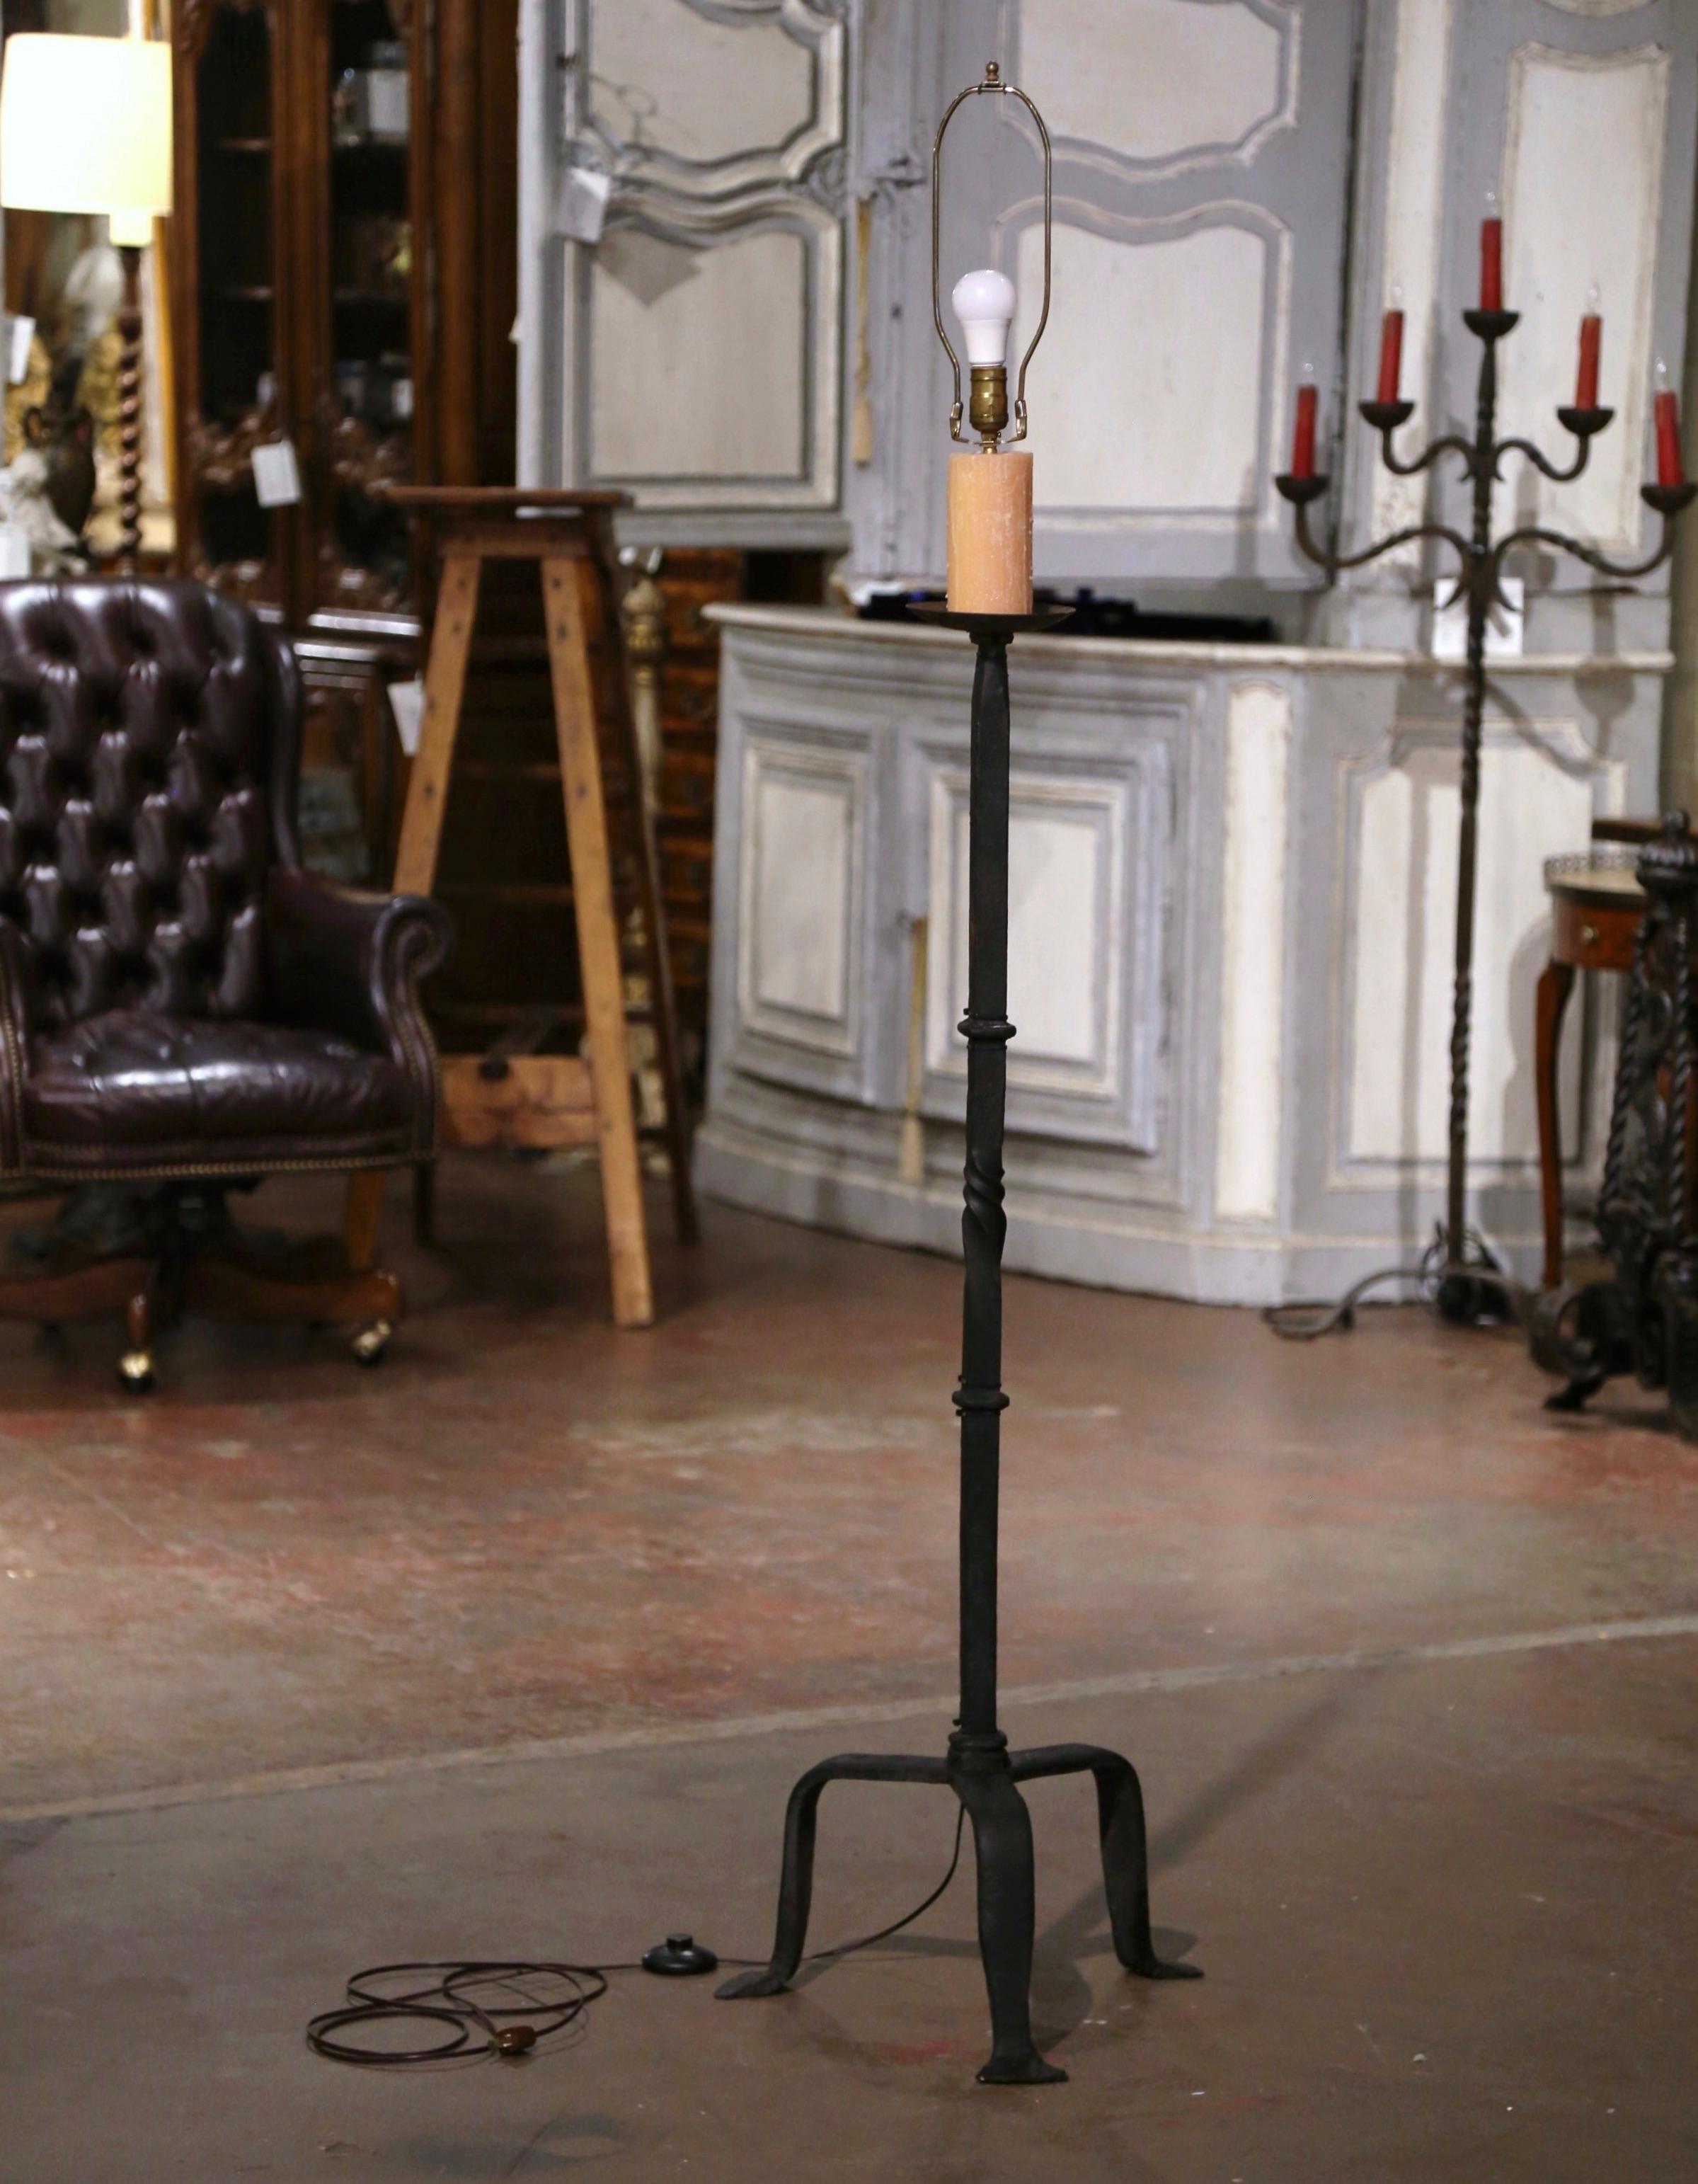 Decorate a study of office with this elegant floor fixture. Crafted in southern France, circa 1860, the candelabra lamp stands on a tripod base ending with three small feet. The twisted stem is topped with a single light with new wiring. The light